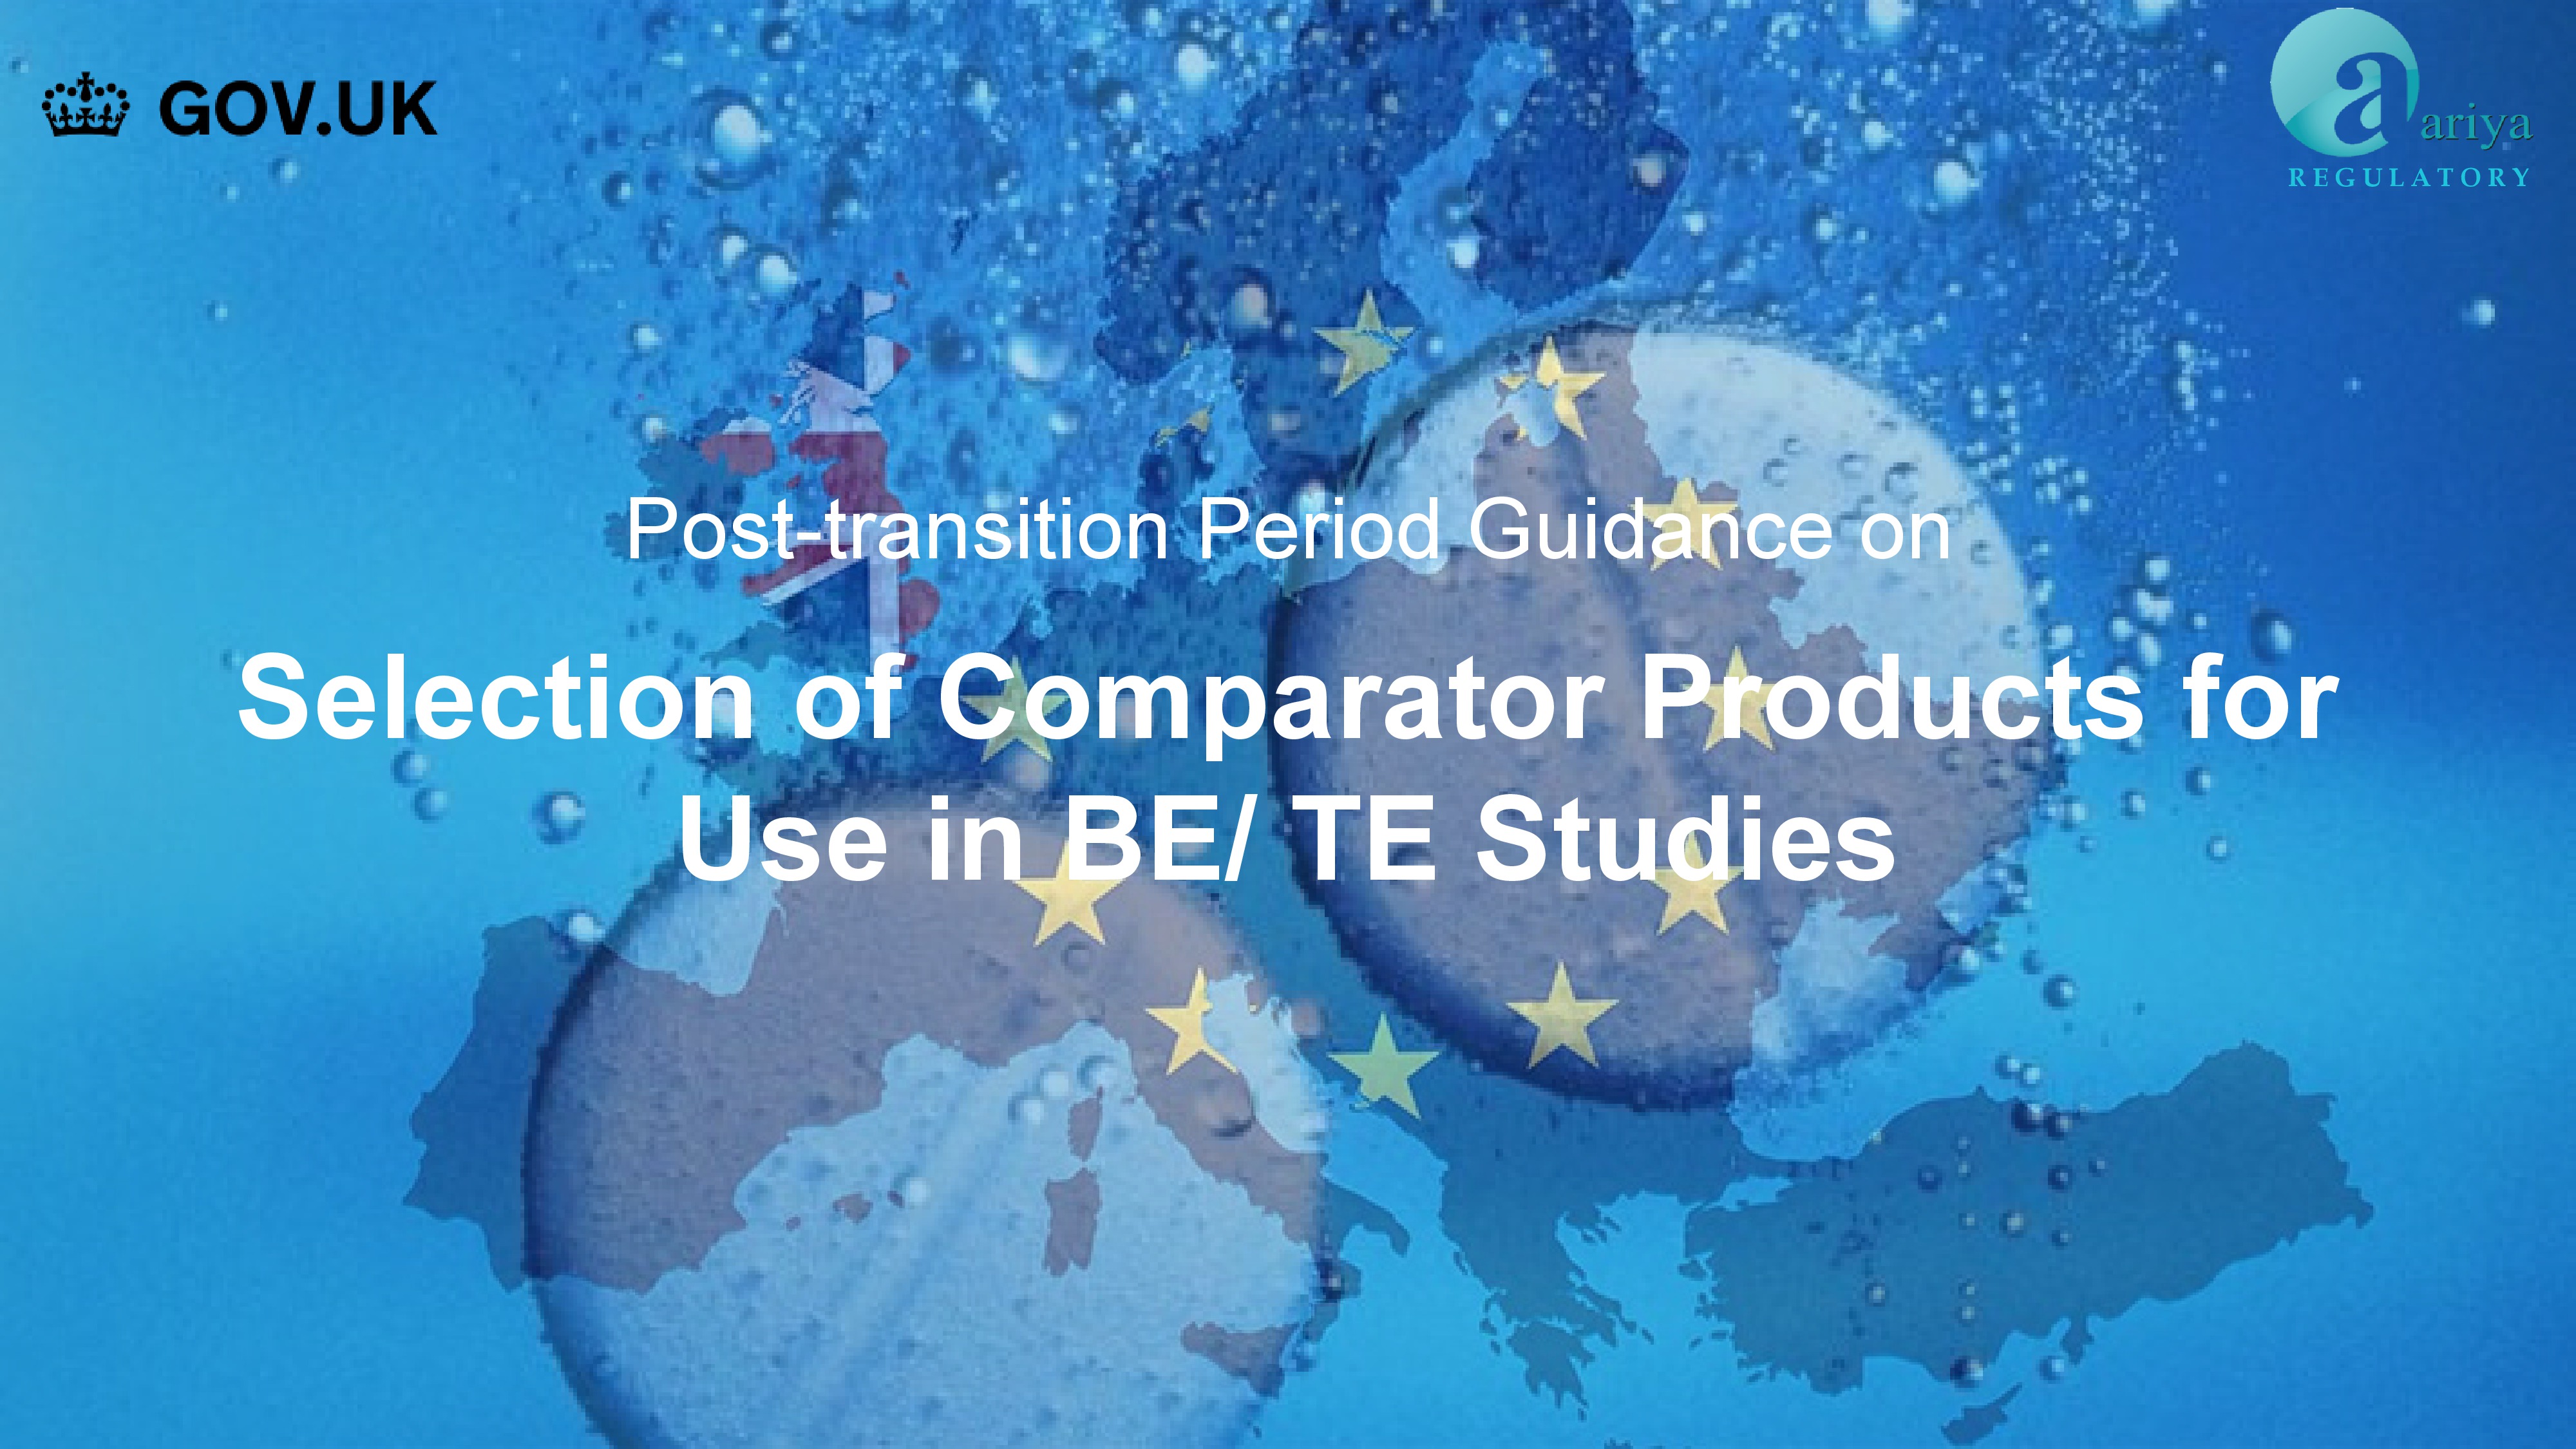 Selection of Comparator Products for Use in BE Studies